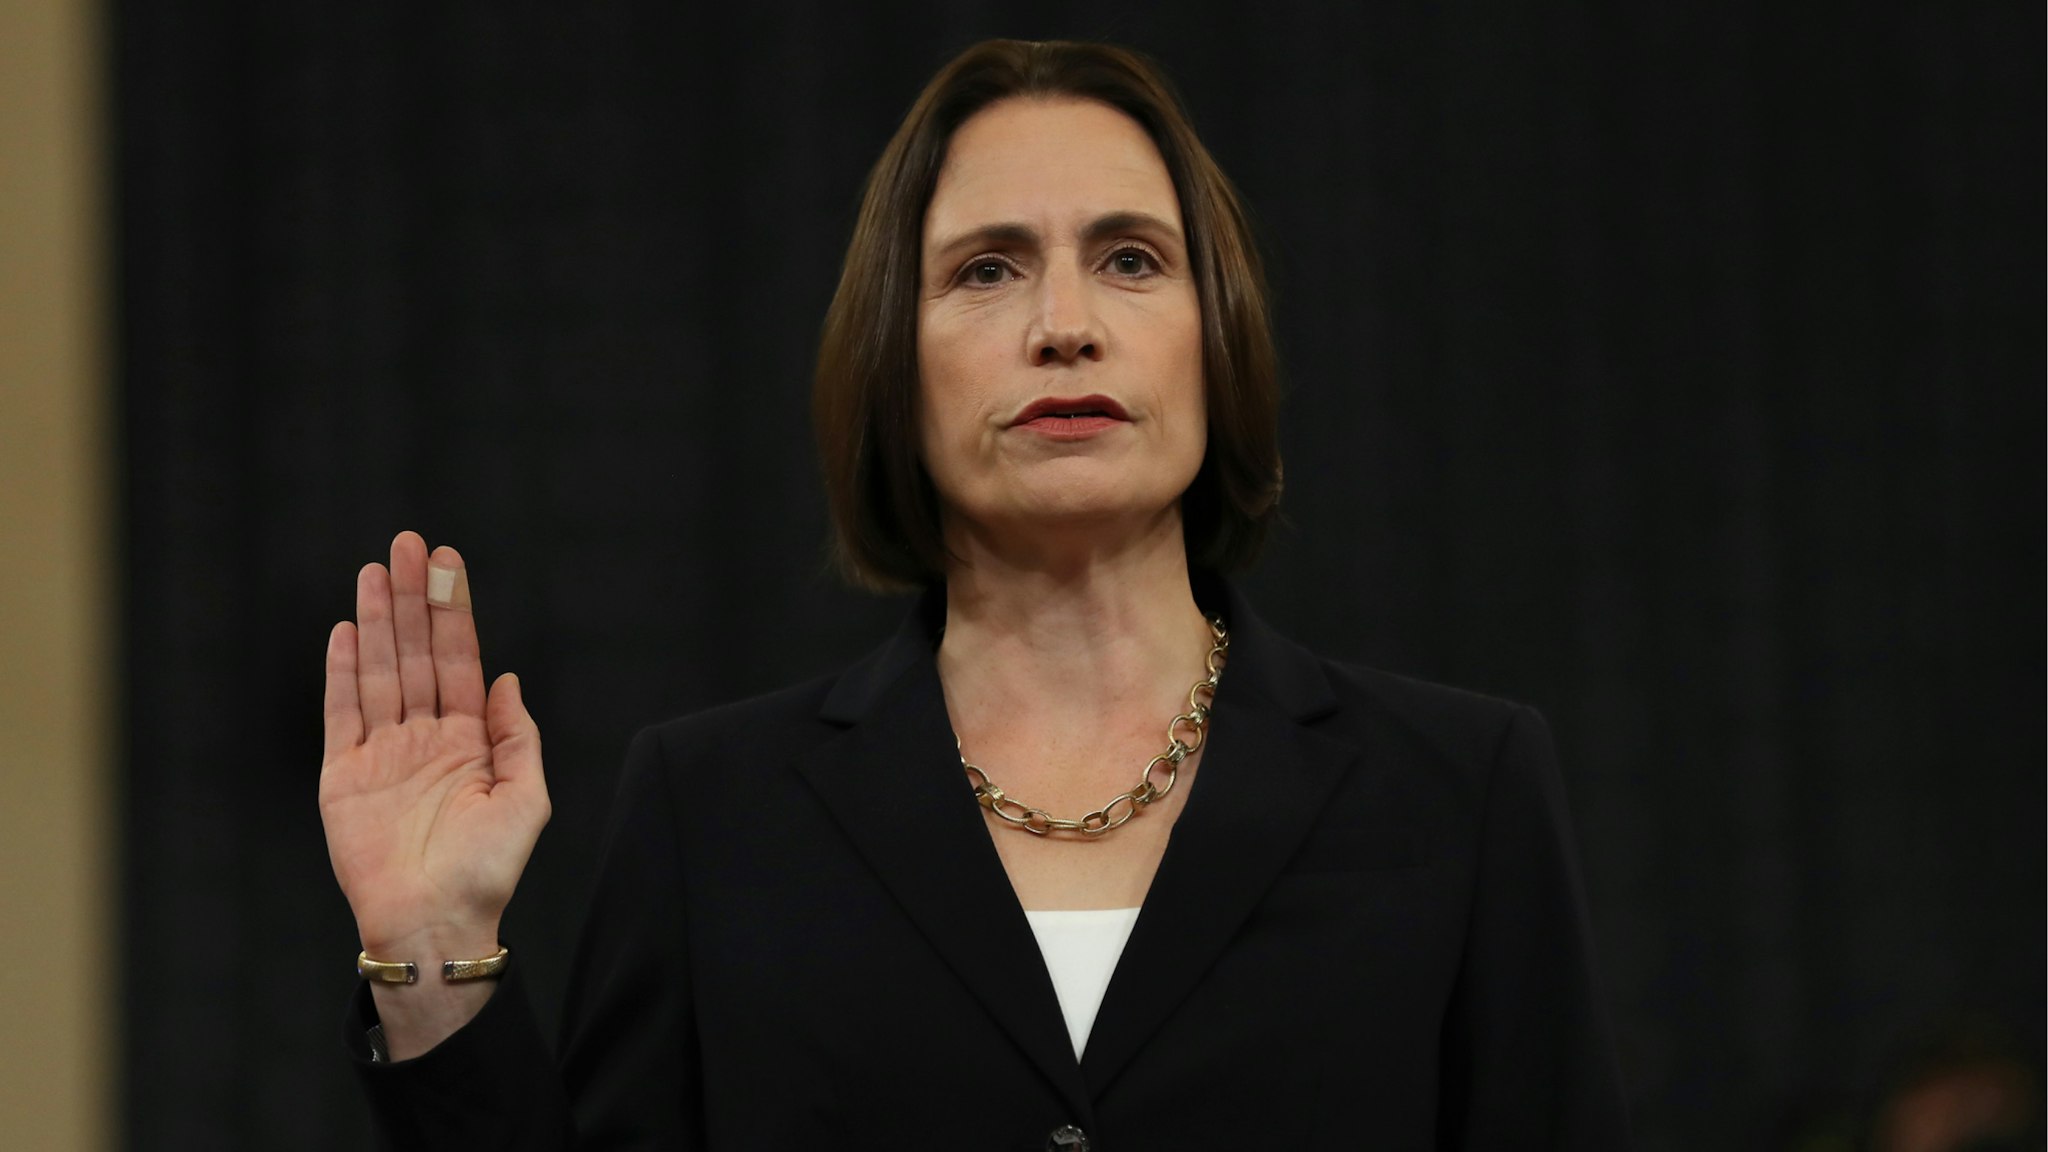 Fiona Hill, the National Security Council’s former senior director for Europe and Russia, is sworn in to testify before the House Intelligence Committee in the Longworth House Office Building on Capitol Hill November 21, 2019 in Washington, DC.